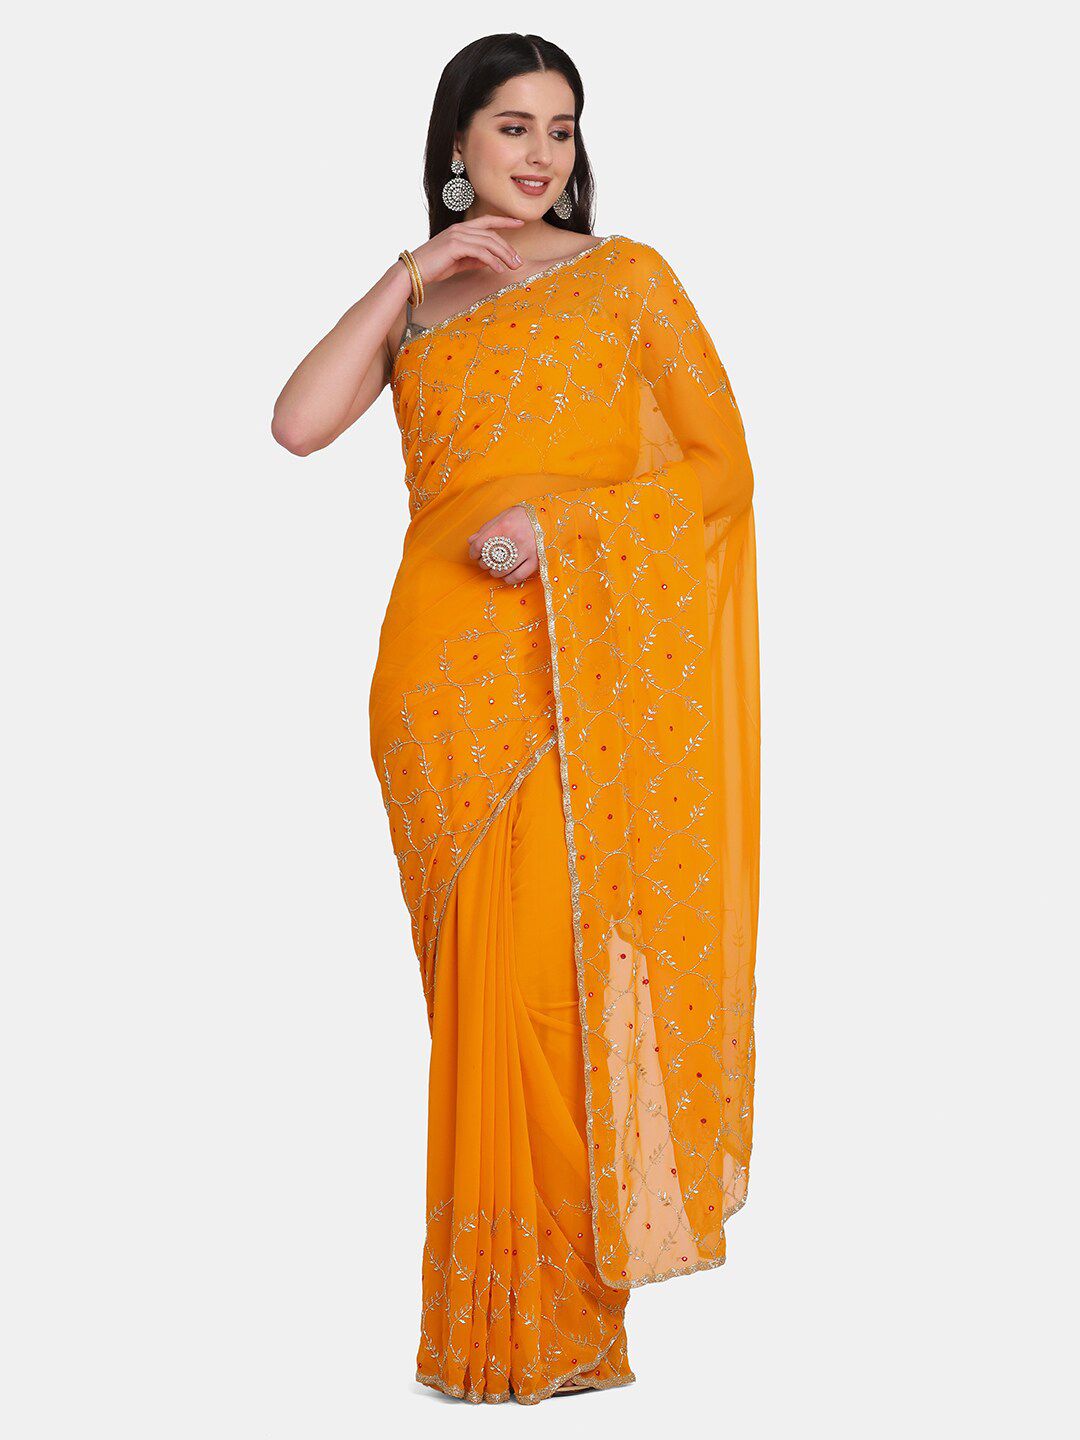 BOMBAY SELECTIONS Women Yellow Georgette Saree Price in India